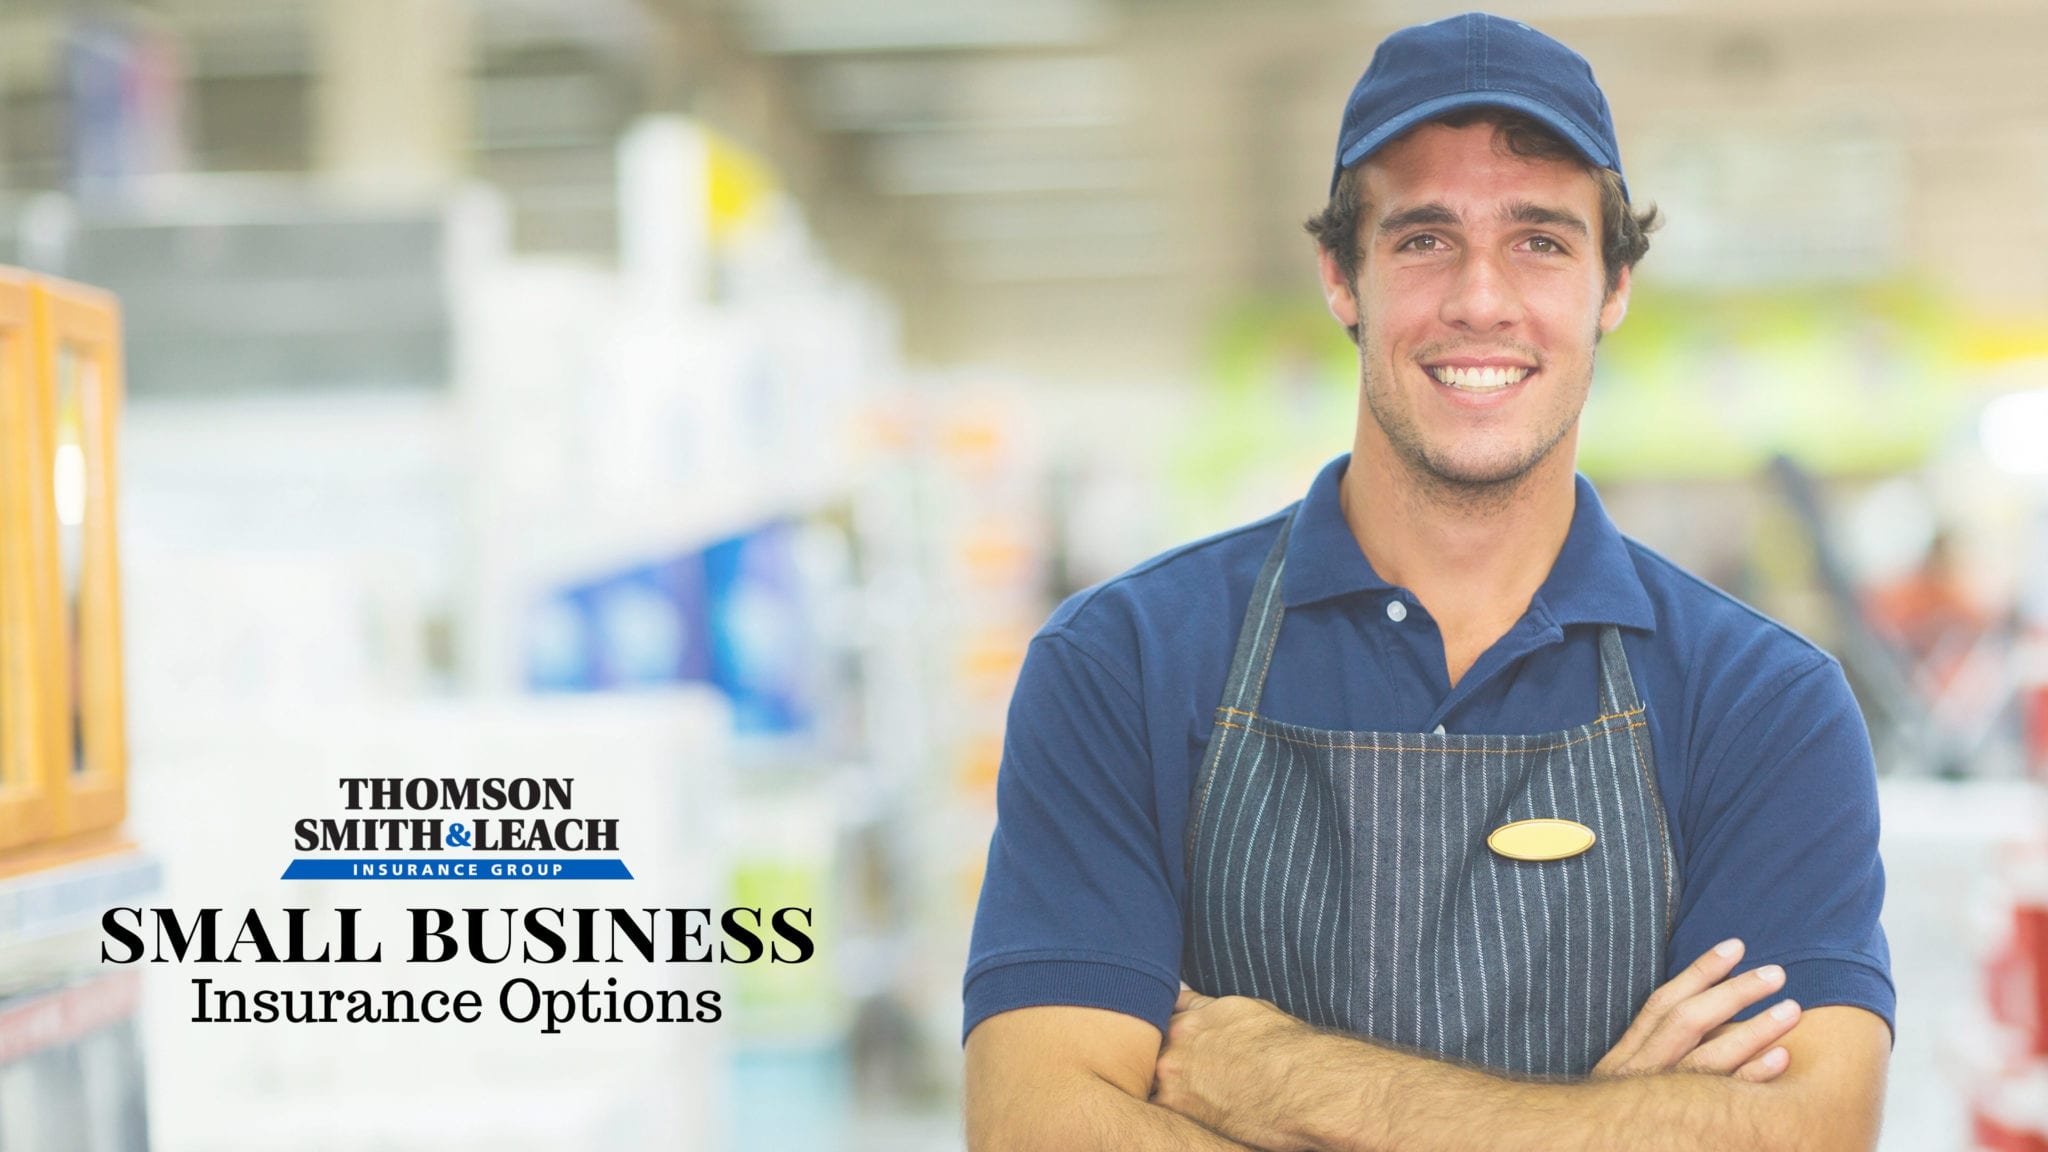 small business operator smiling